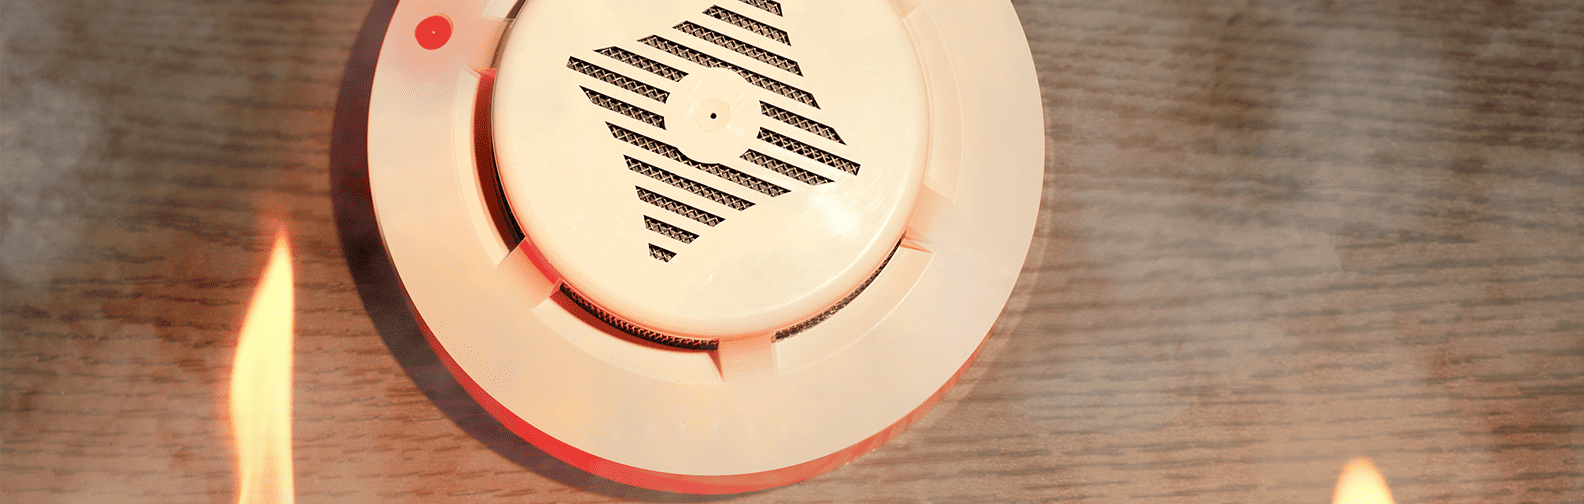 hardwired fire alarm smoke detectors electrical wiring